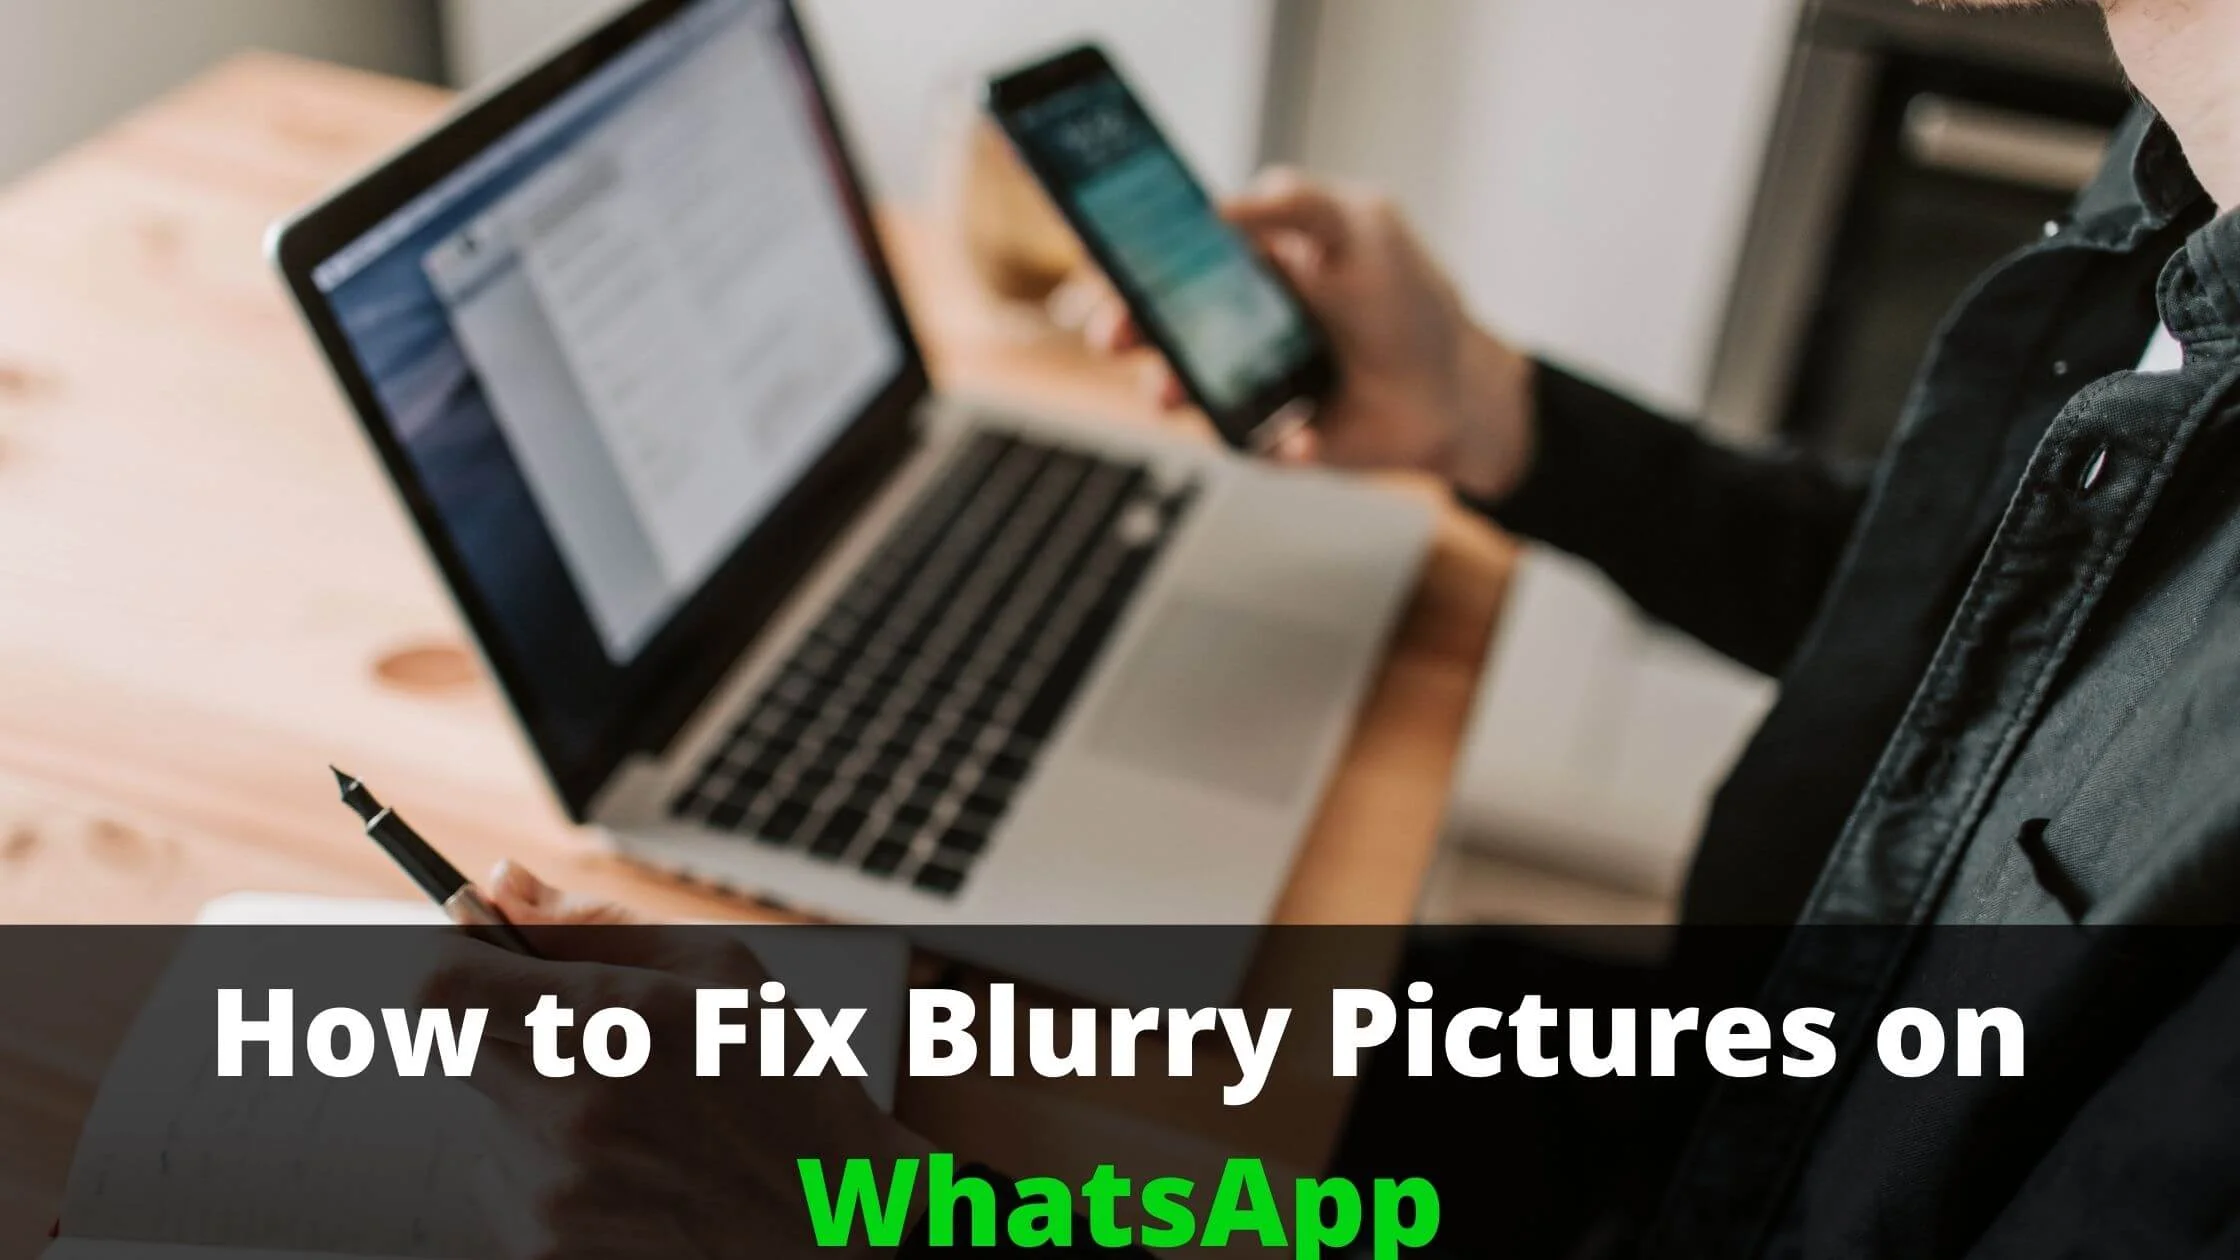 Blurry Pictures on WhatsApp